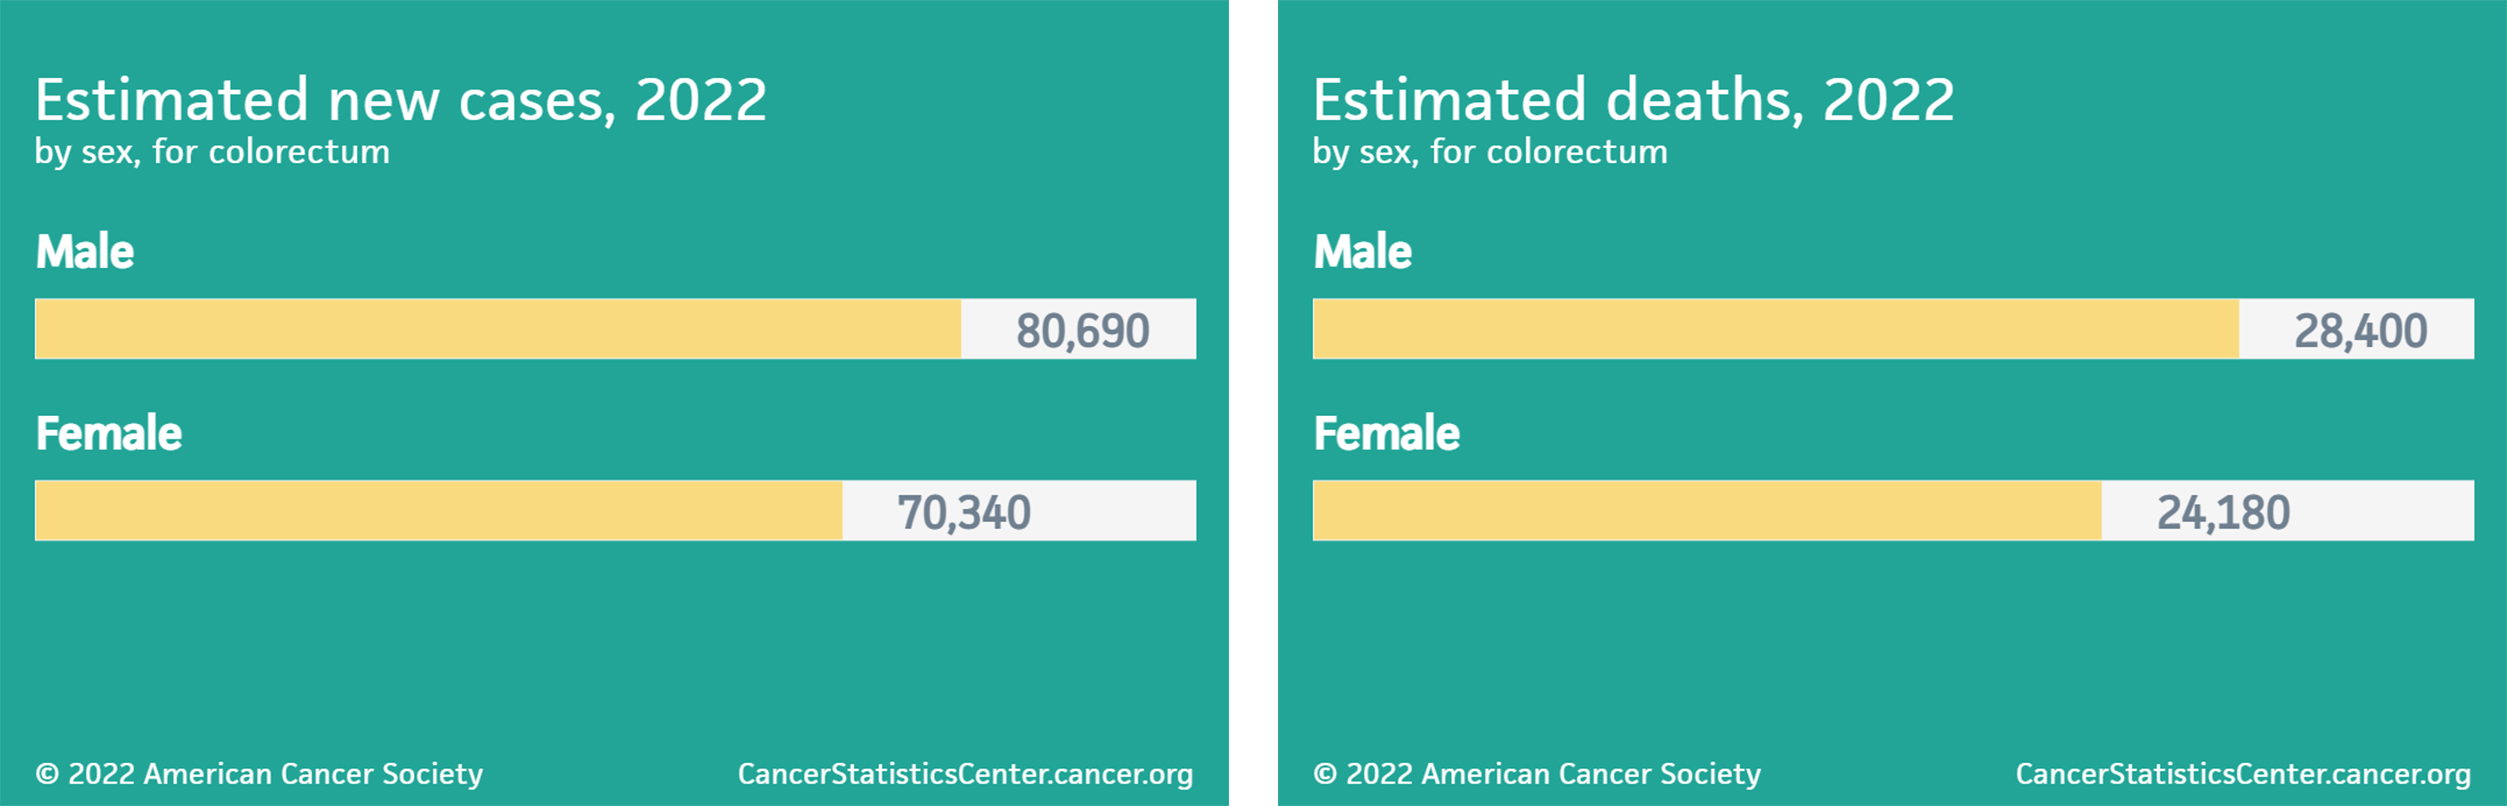 Estimated new cases and deaths of colorectal cancer 2022